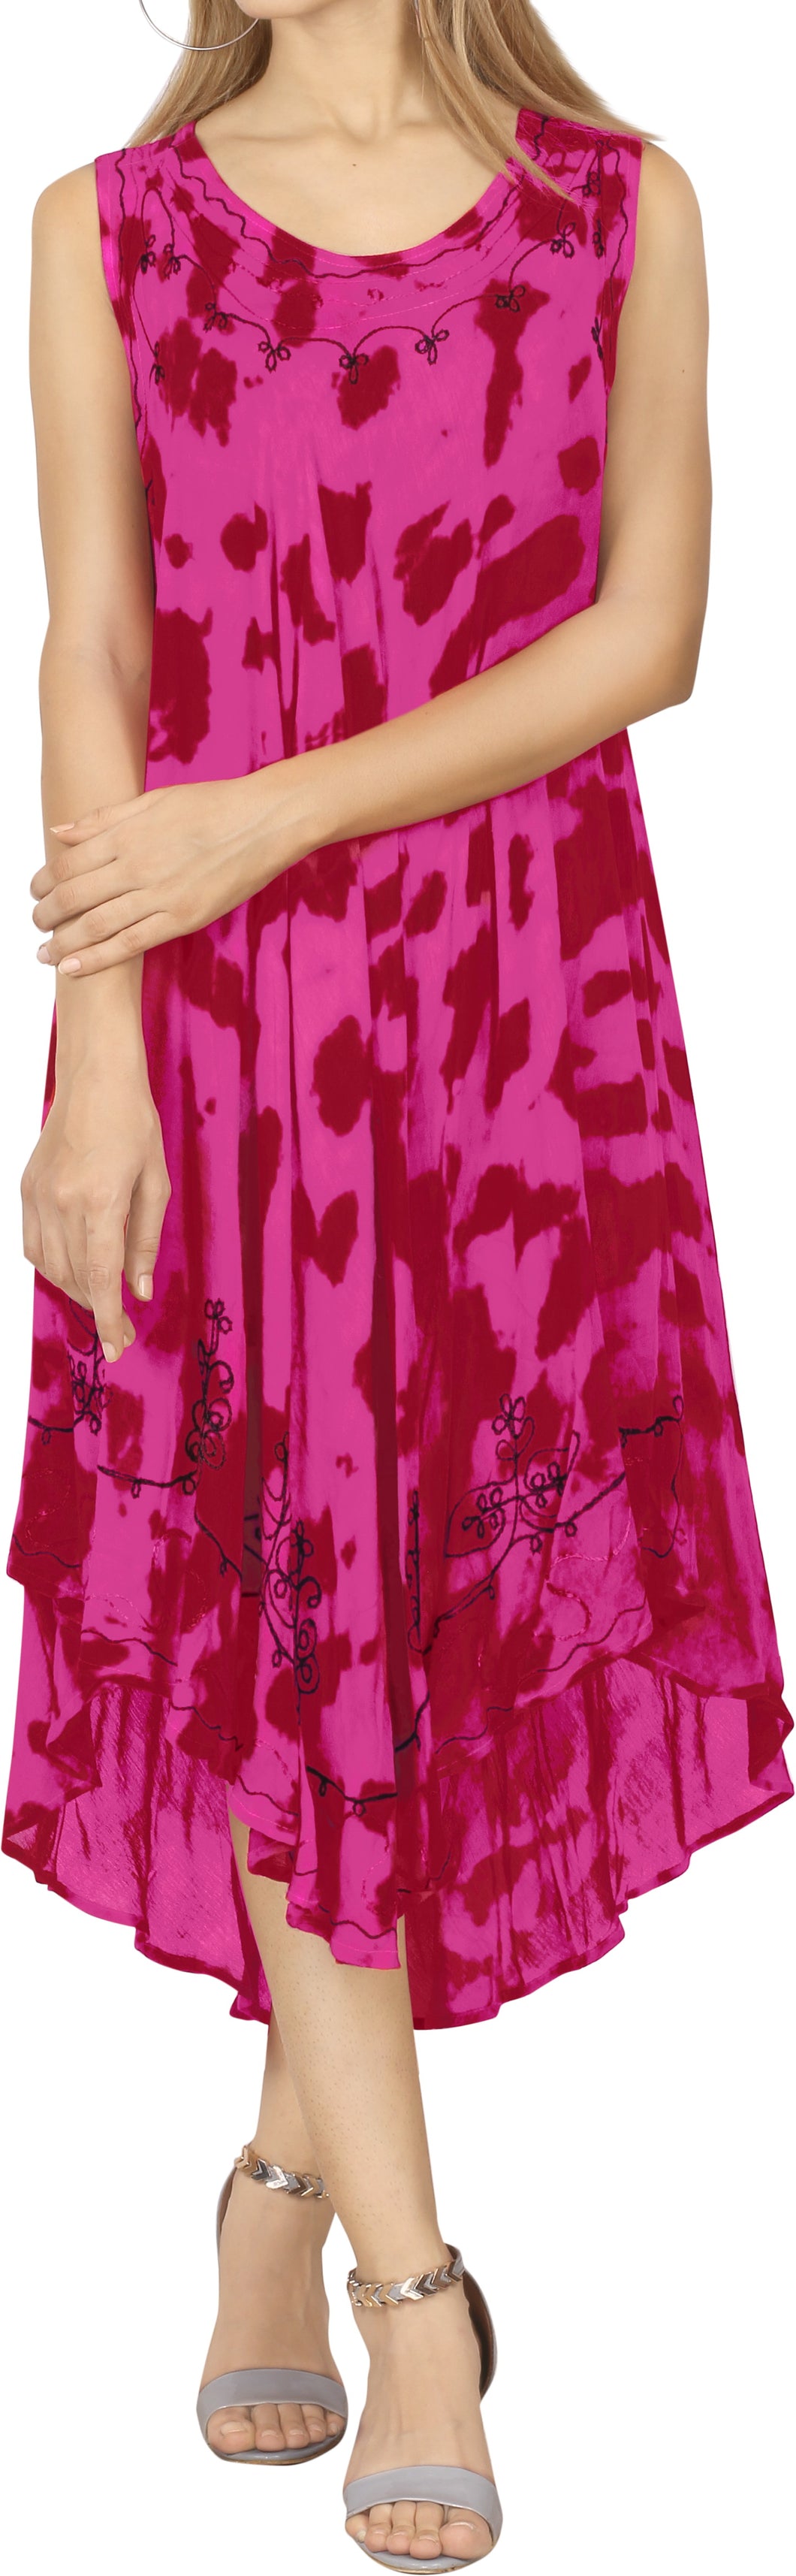 Women's Tie Dye Casual Rayon Embroidered Sleeveless Loose Maxi Beach Dress Pink